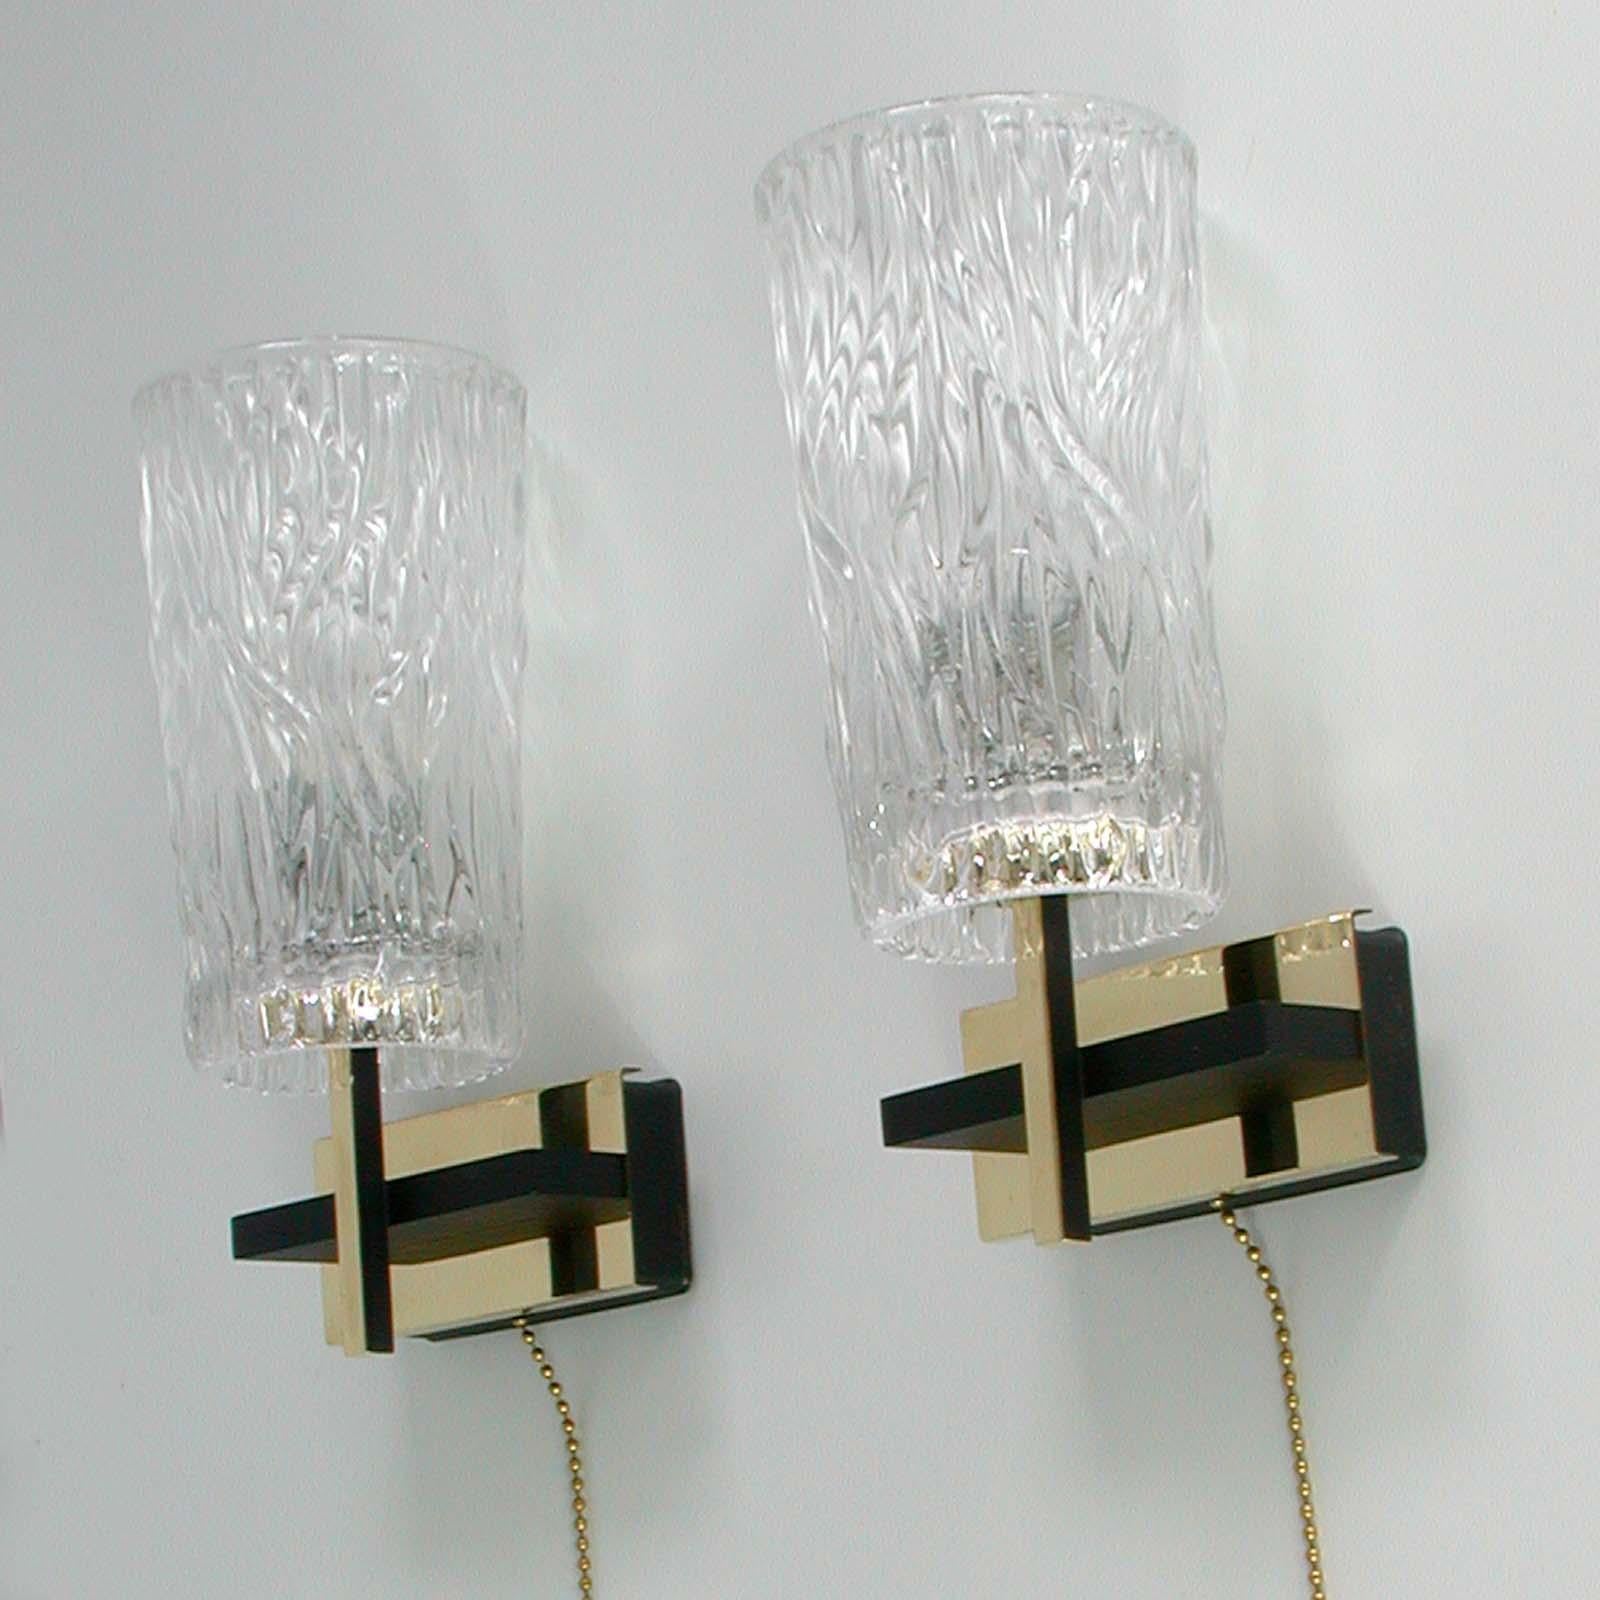 Midcentury French Brass and Textured Glass Sconces by Maison Arlus, 1950s For Sale 3